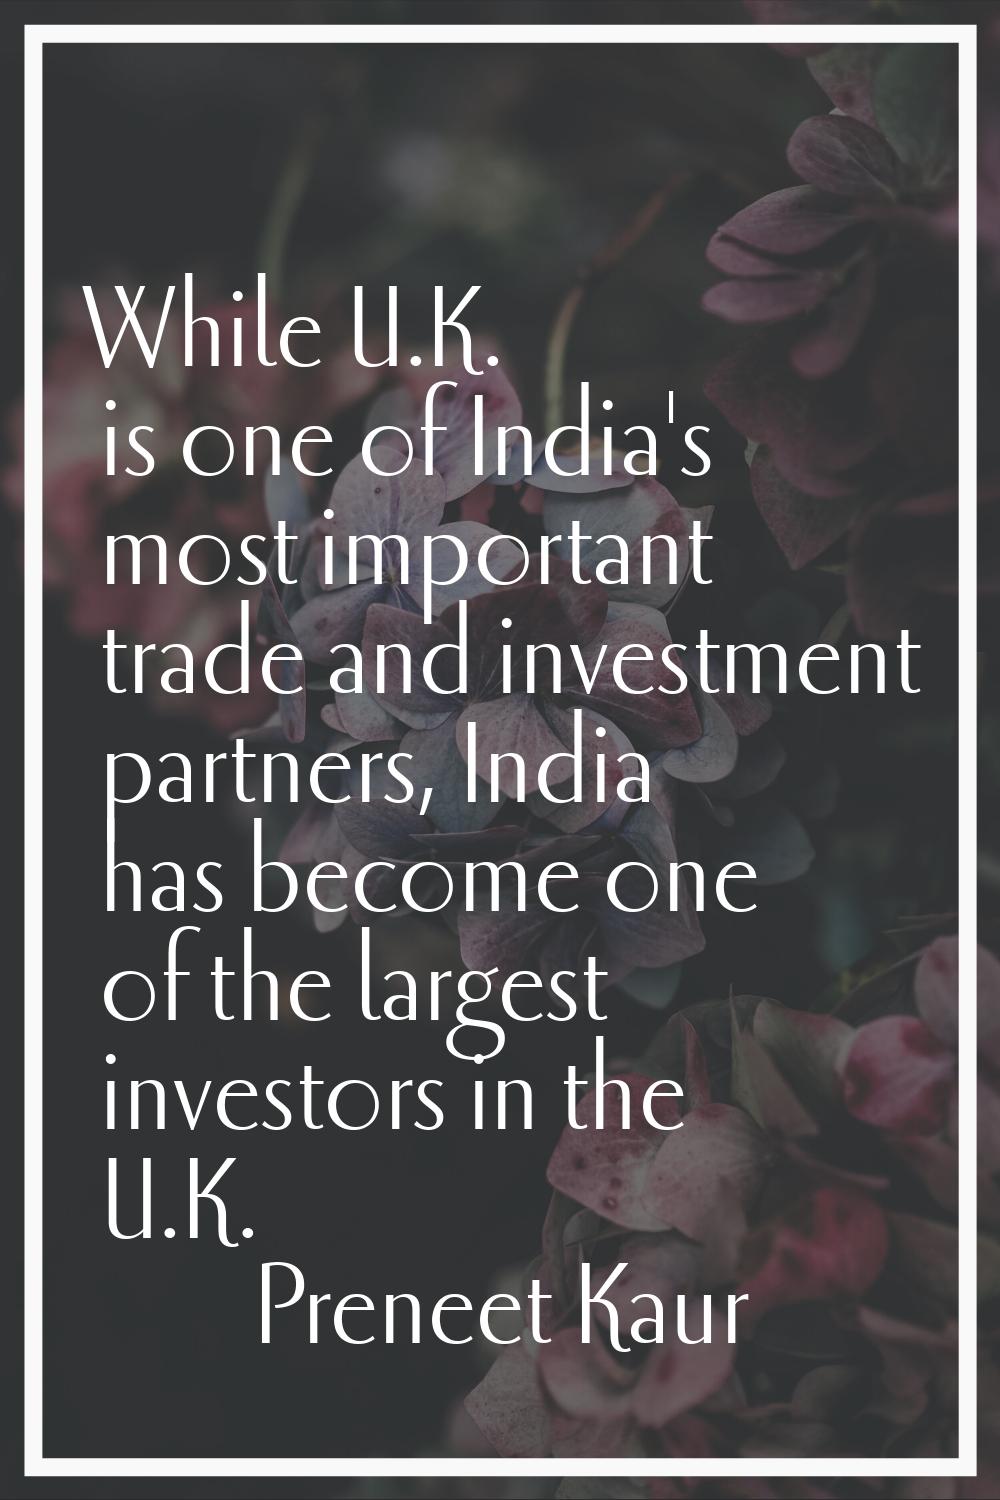 While U.K. is one of India's most important trade and investment partners, India has become one of 